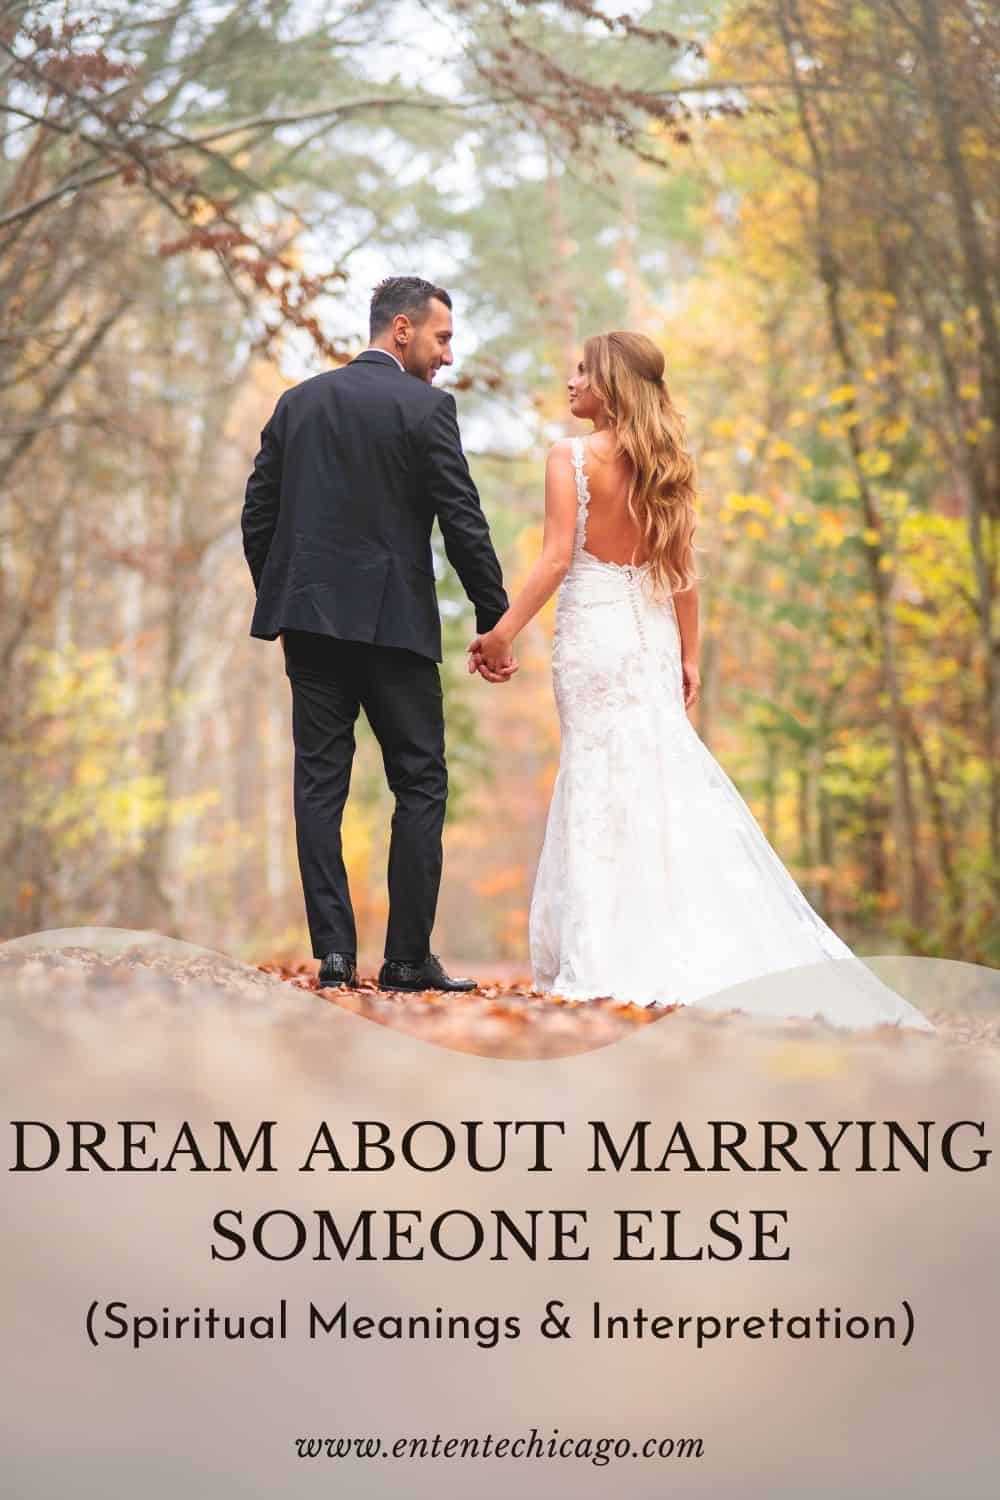 Dream About Marrying Someone Else (Spiritual Meanings & Interpretation)